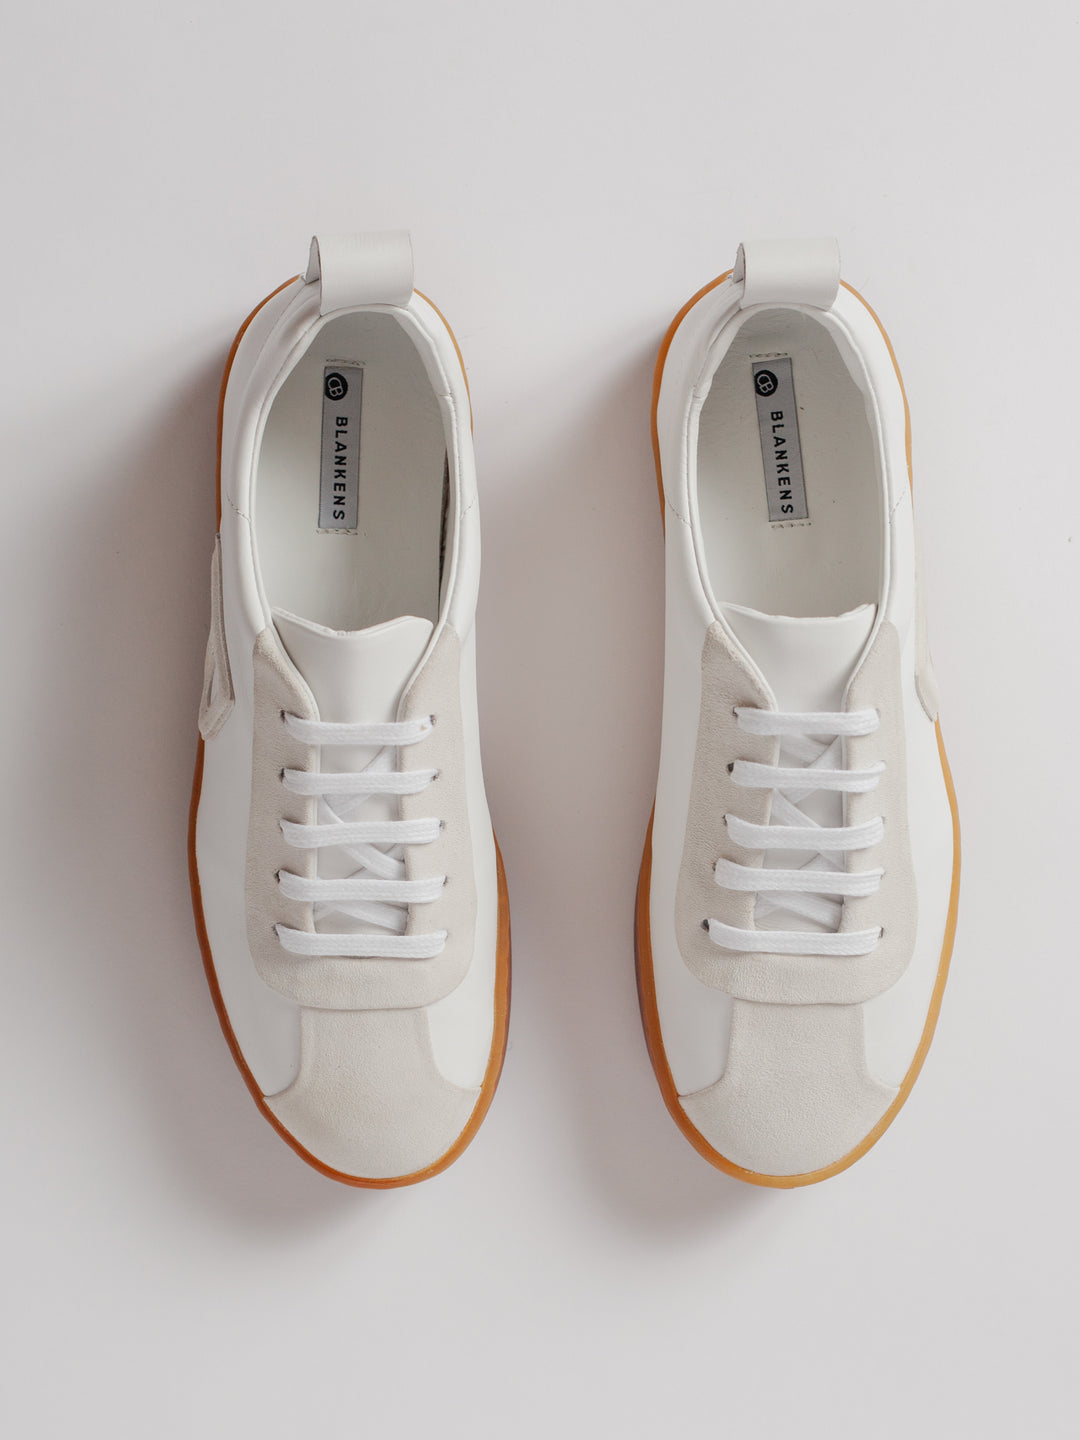 Blankens The Elin White Sneaker with brown rubber sole and B-detail